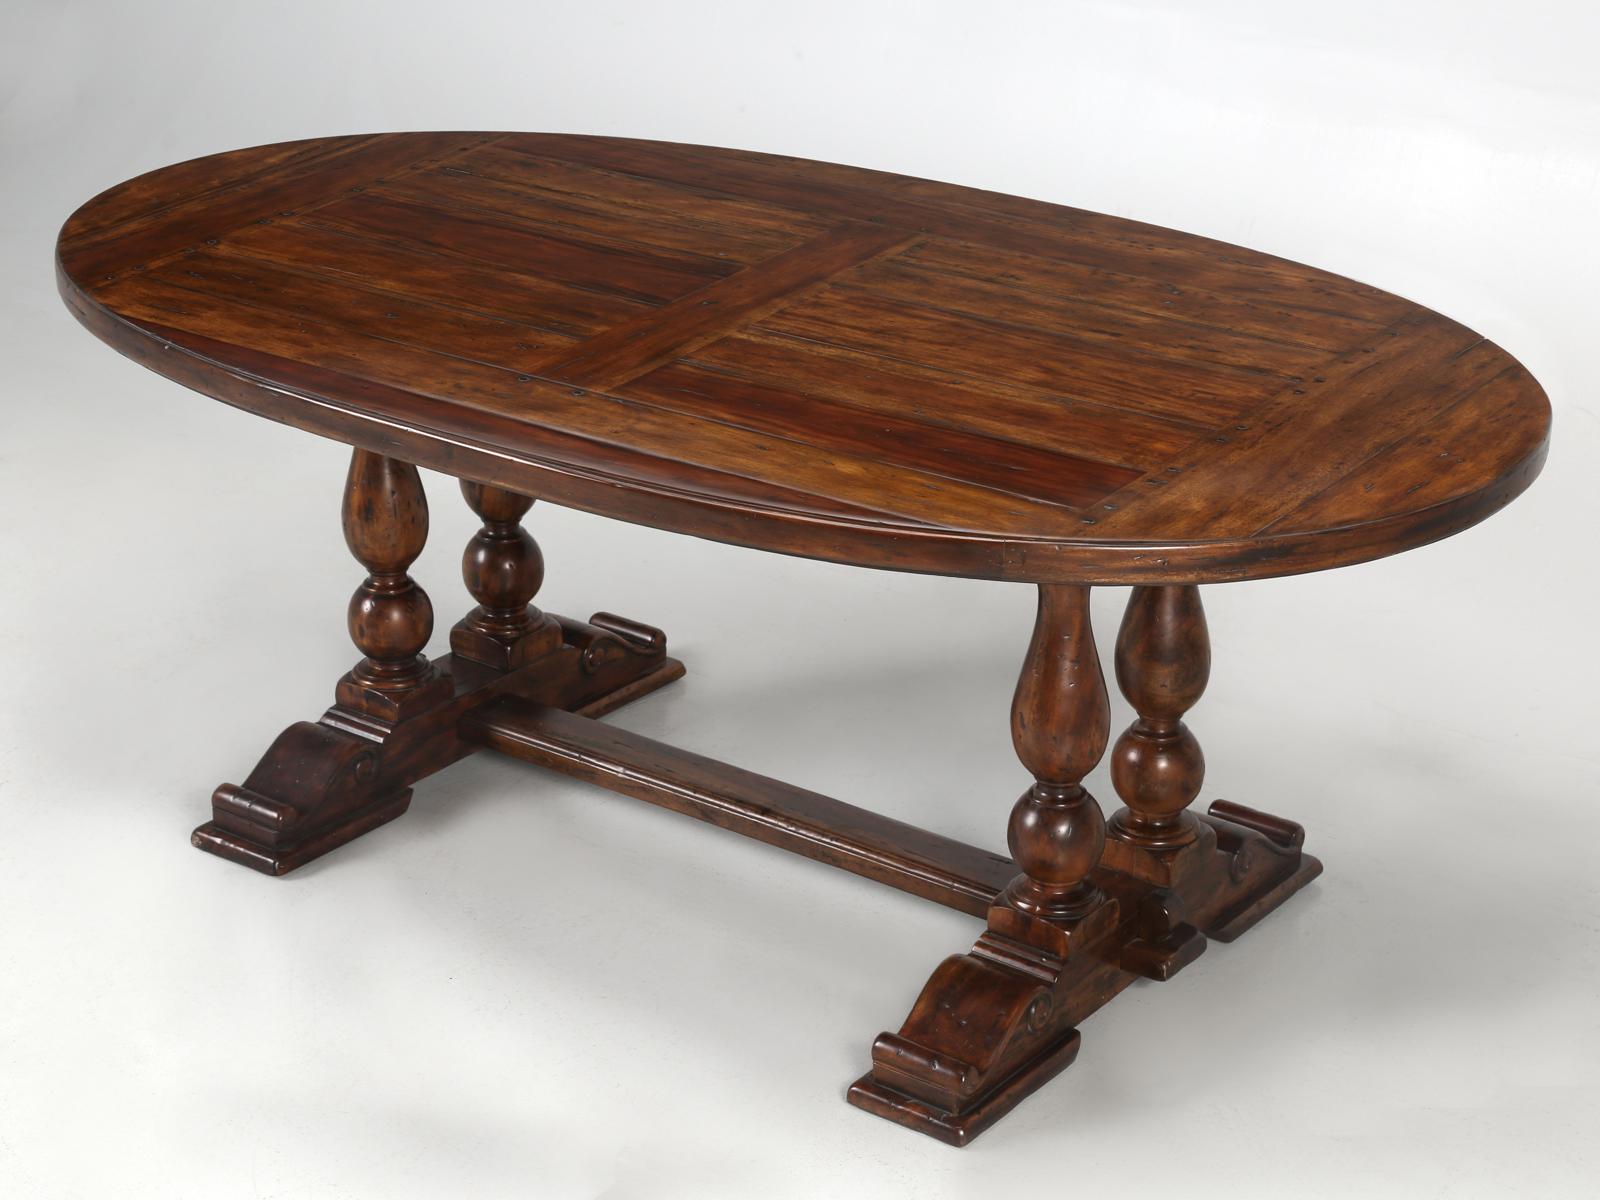 Reproduction oval farm house style dining table made from reclaimed hardwood. A great chunky rustic look for not much dough. Fantastic in a wine cellar.